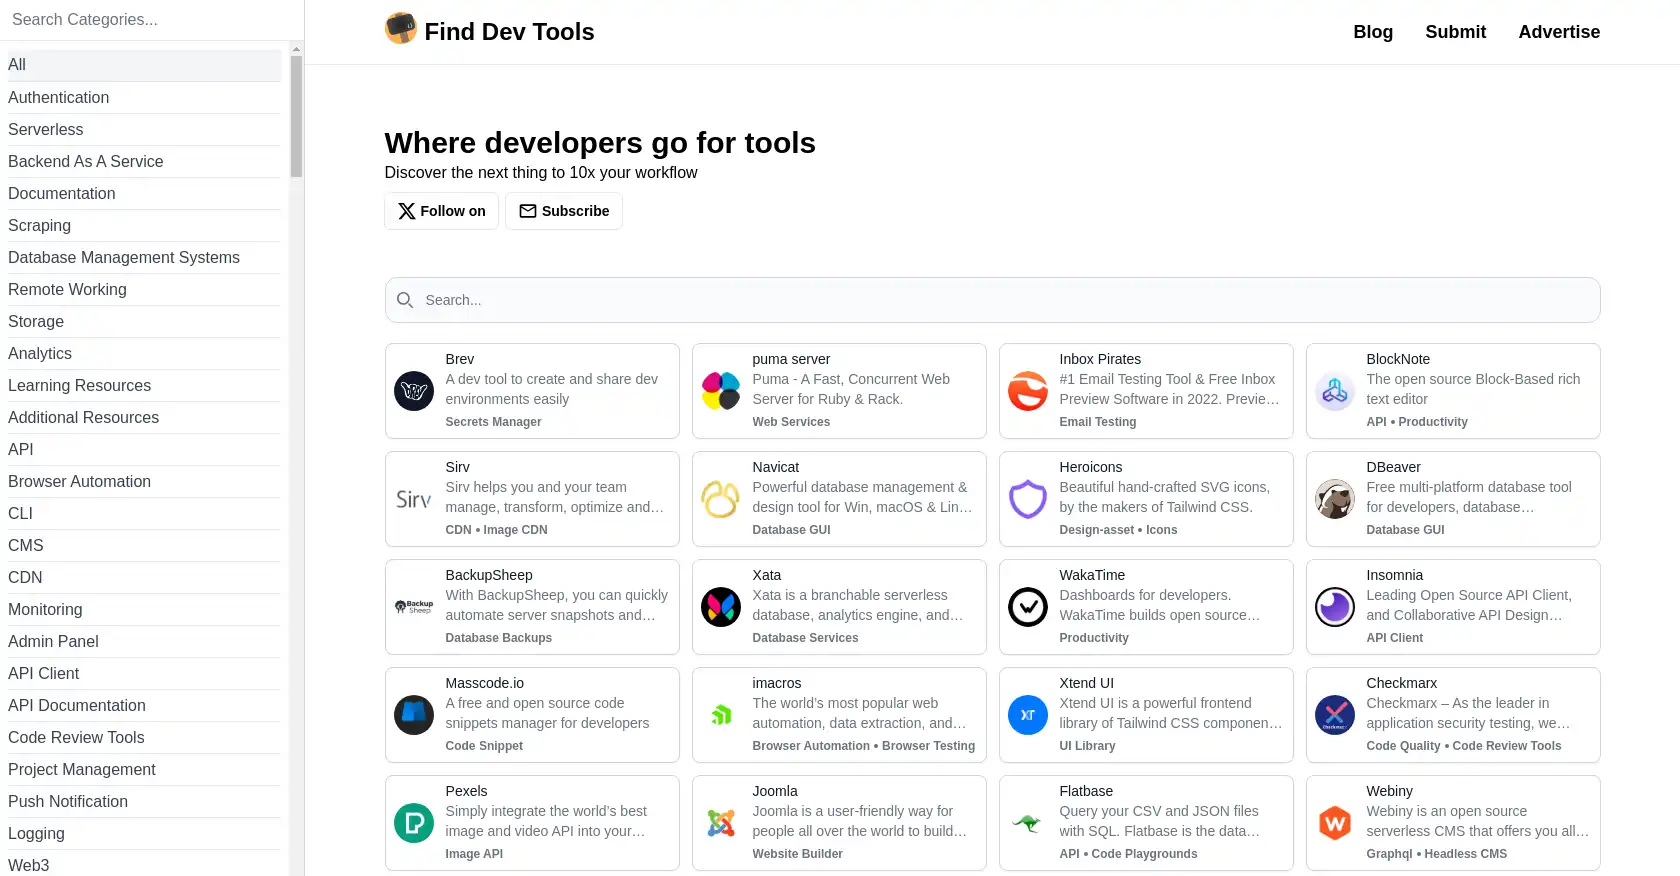 FindDevTools - AI tool for Developer tools, Tool discovery